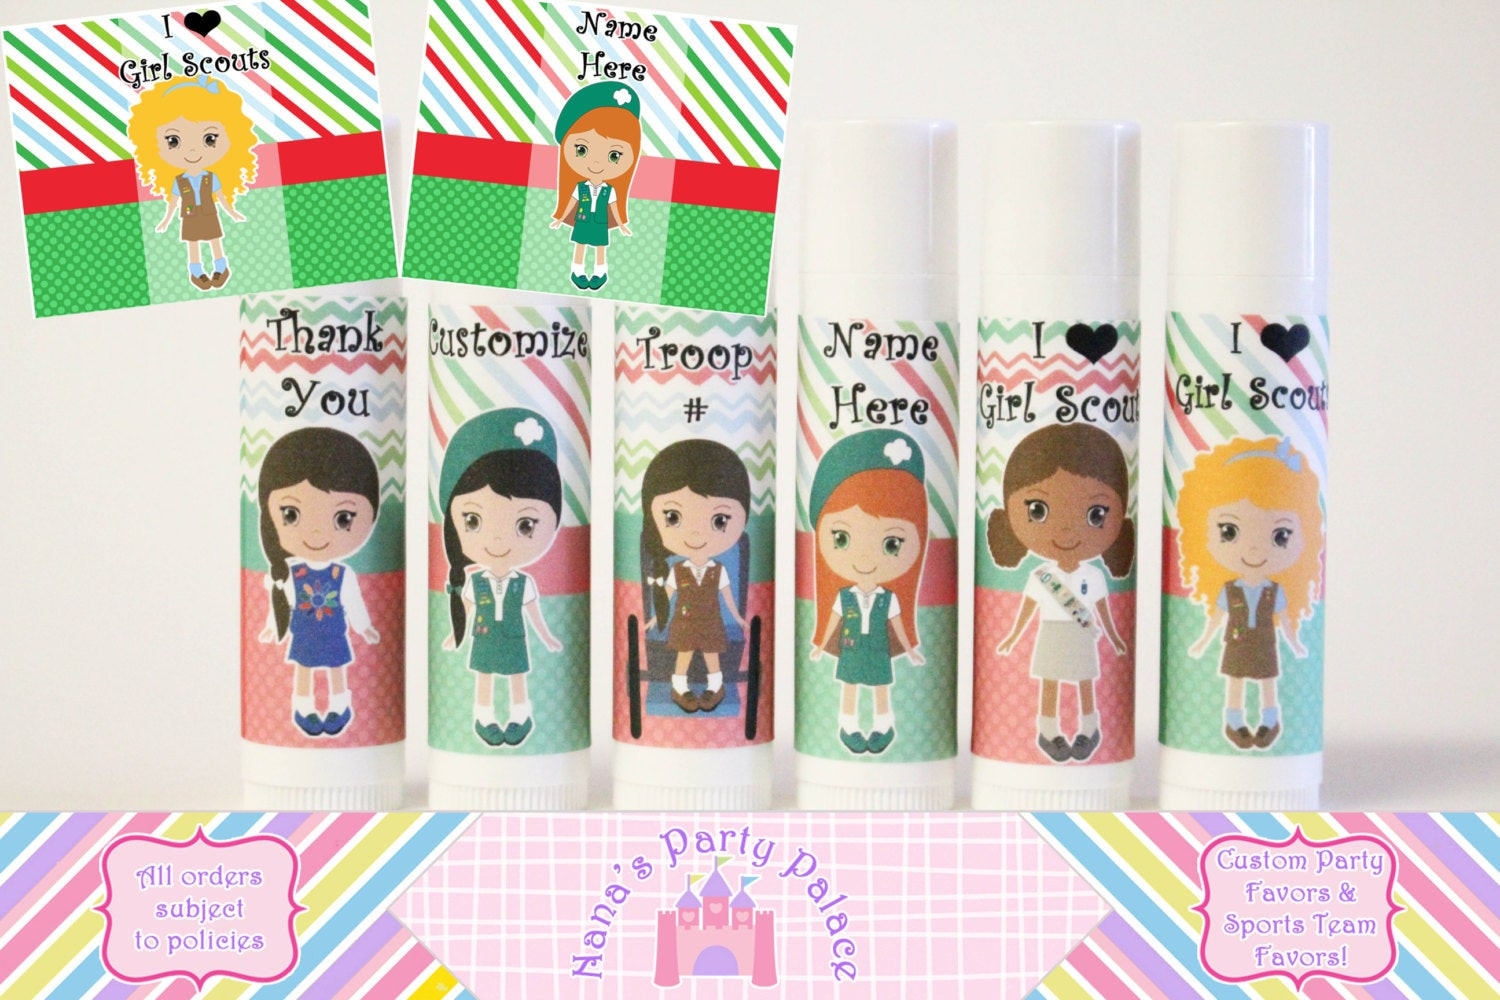 Girl Scout Christmas Party Ideas
 Girl Scout Christmas Gift Girl Scout Party by NanasPartyPalace